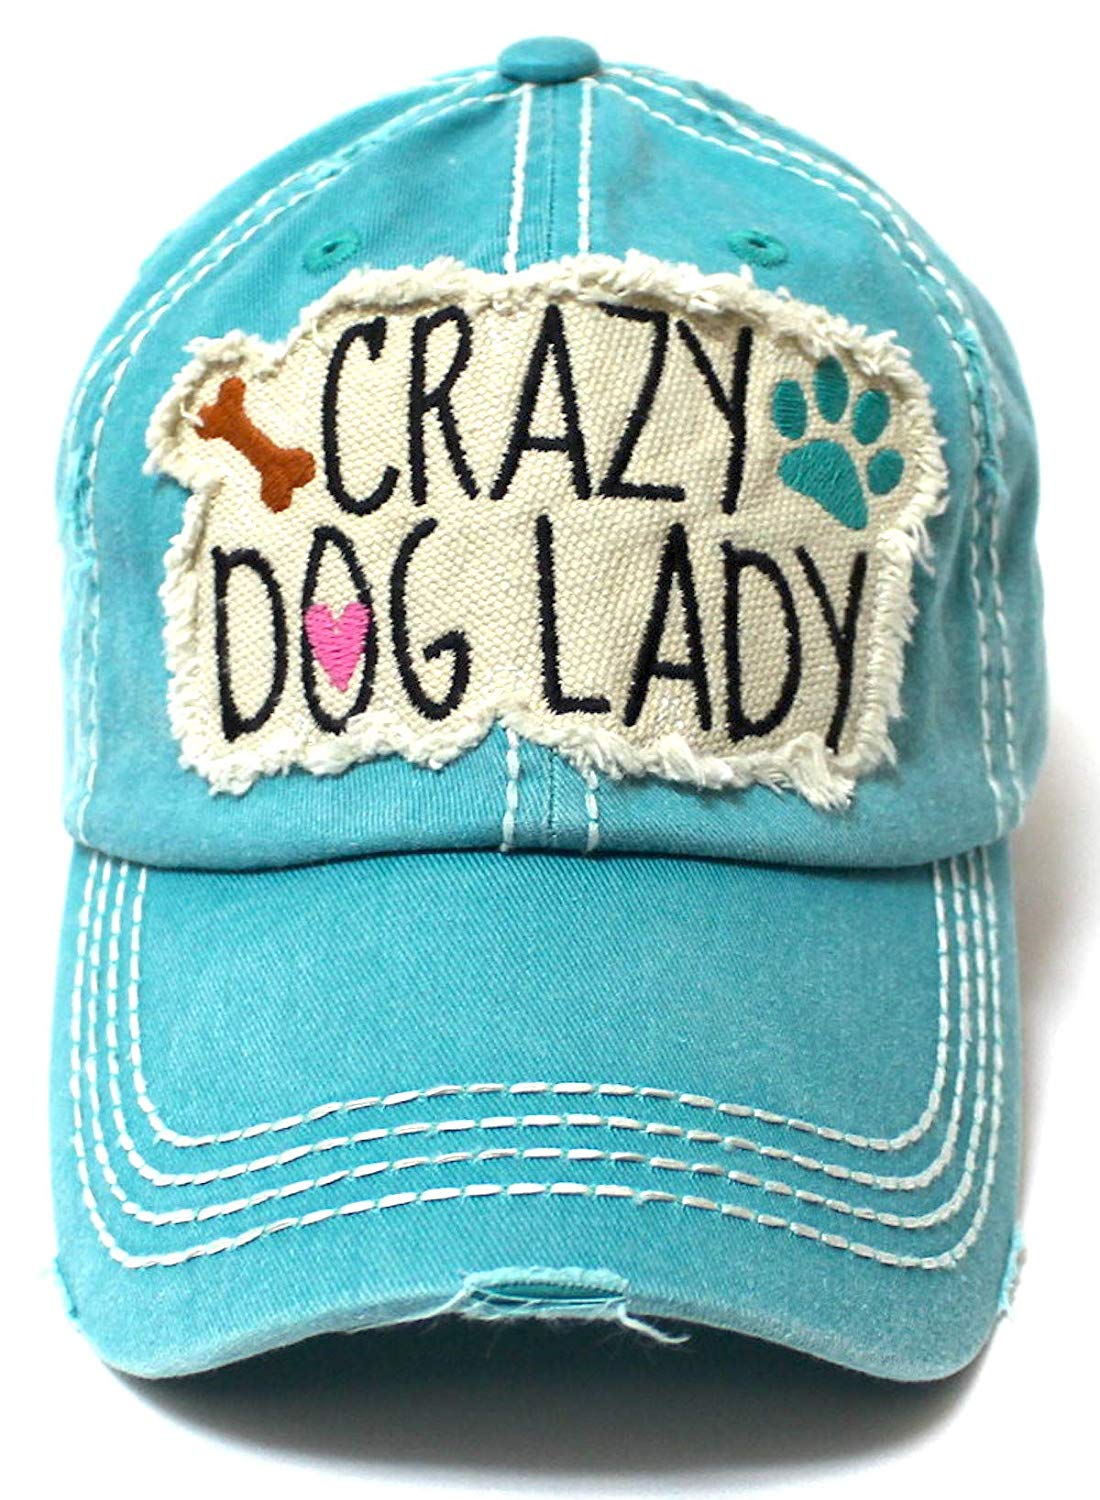 Women's Baseball Cap Crazy Dog Lady Patch Embroidery, Turquoise - Caps 'N Vintage 